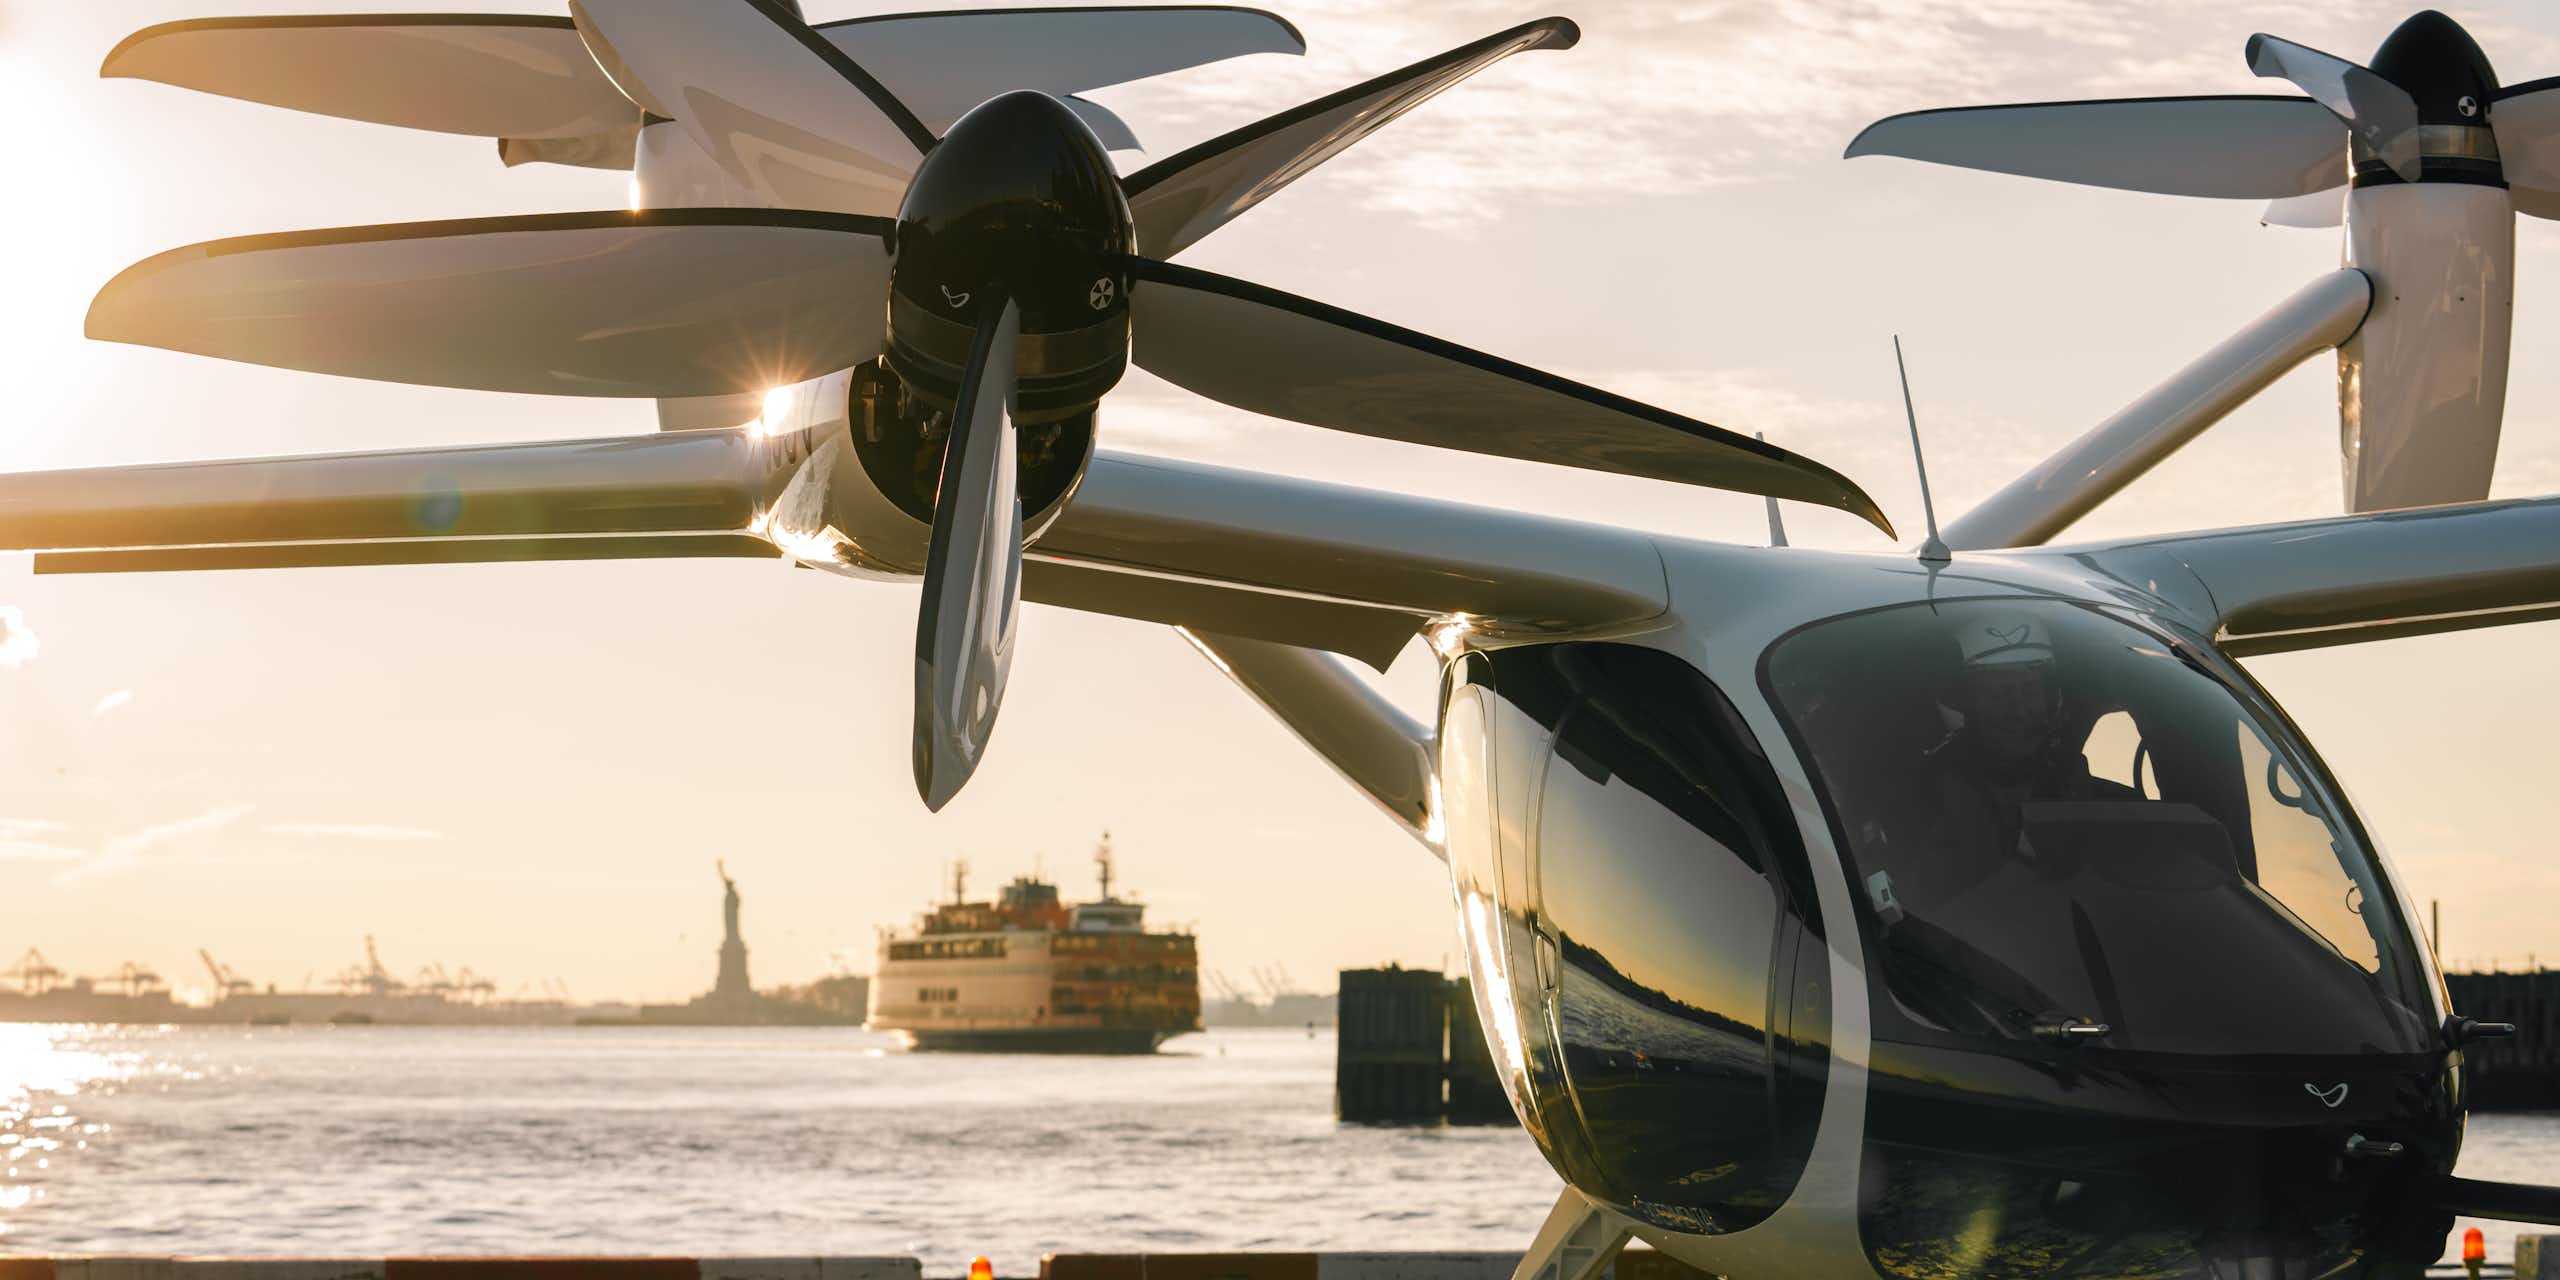 An eVTOL on a helipad in New York City with the Statue of Liberty in the background.